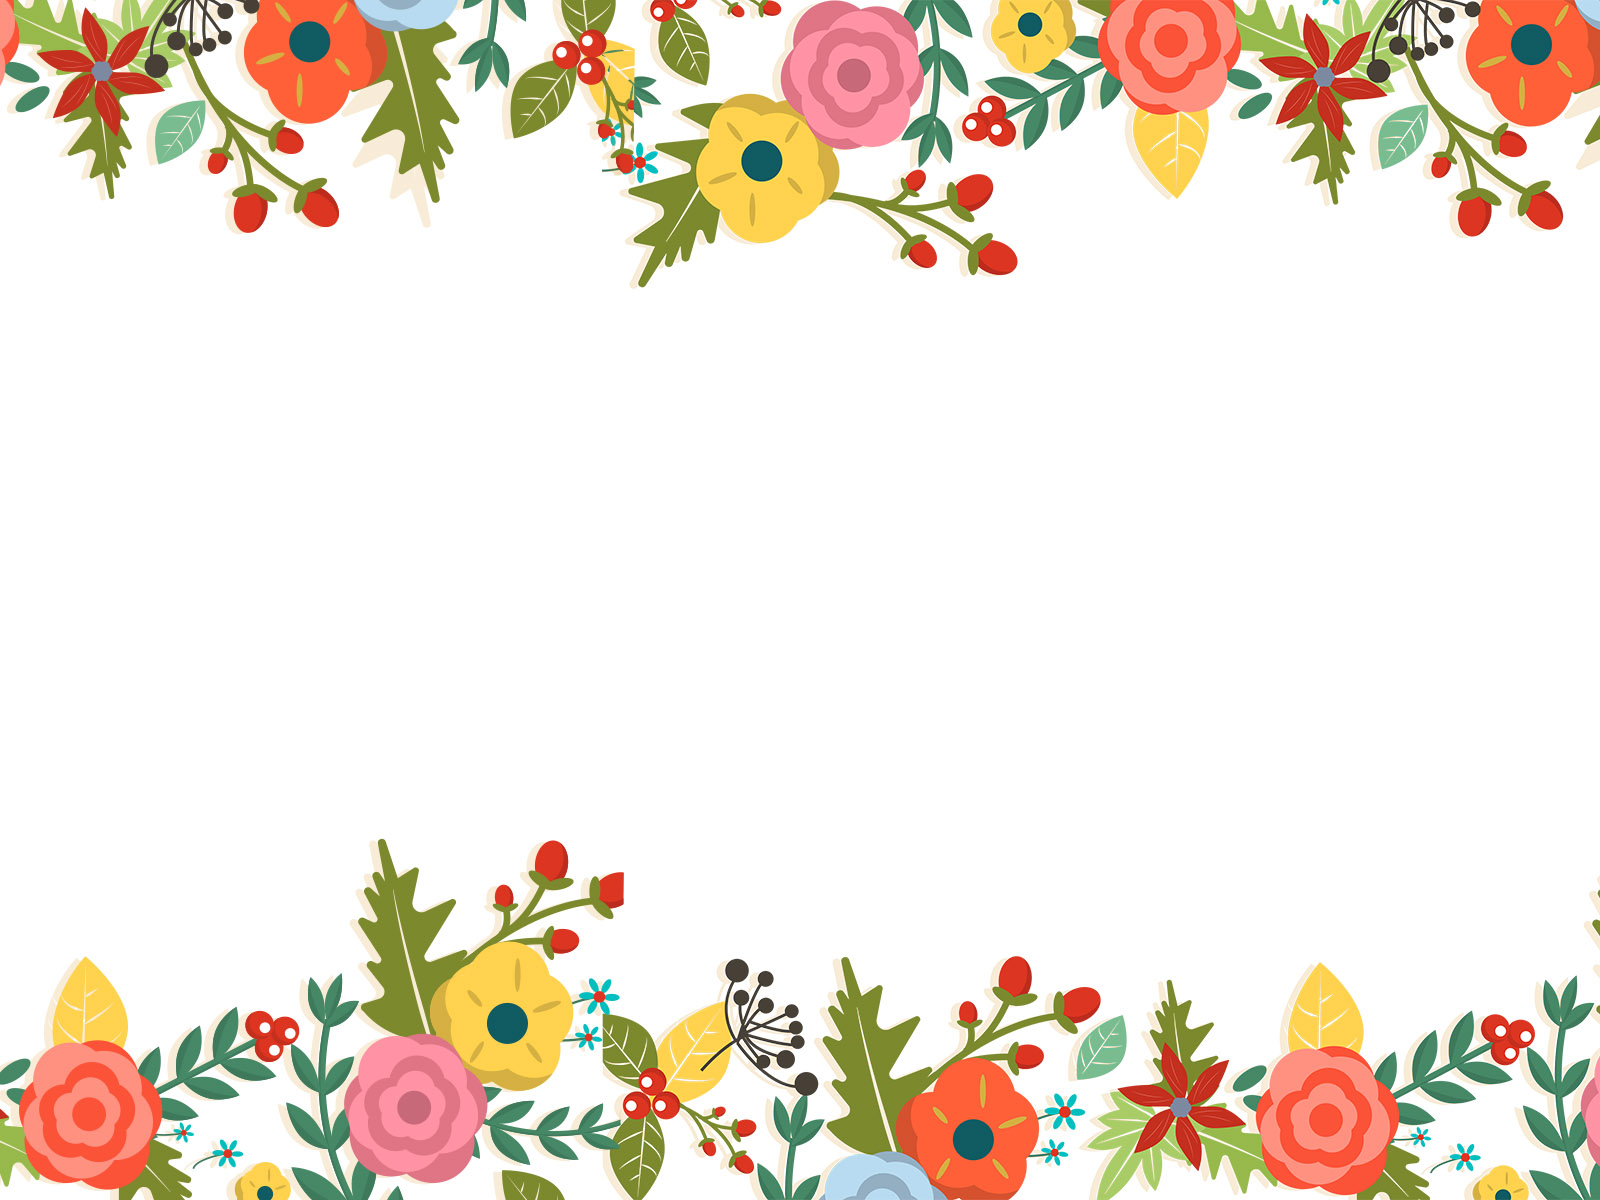 floral backgrounds for powerpoint